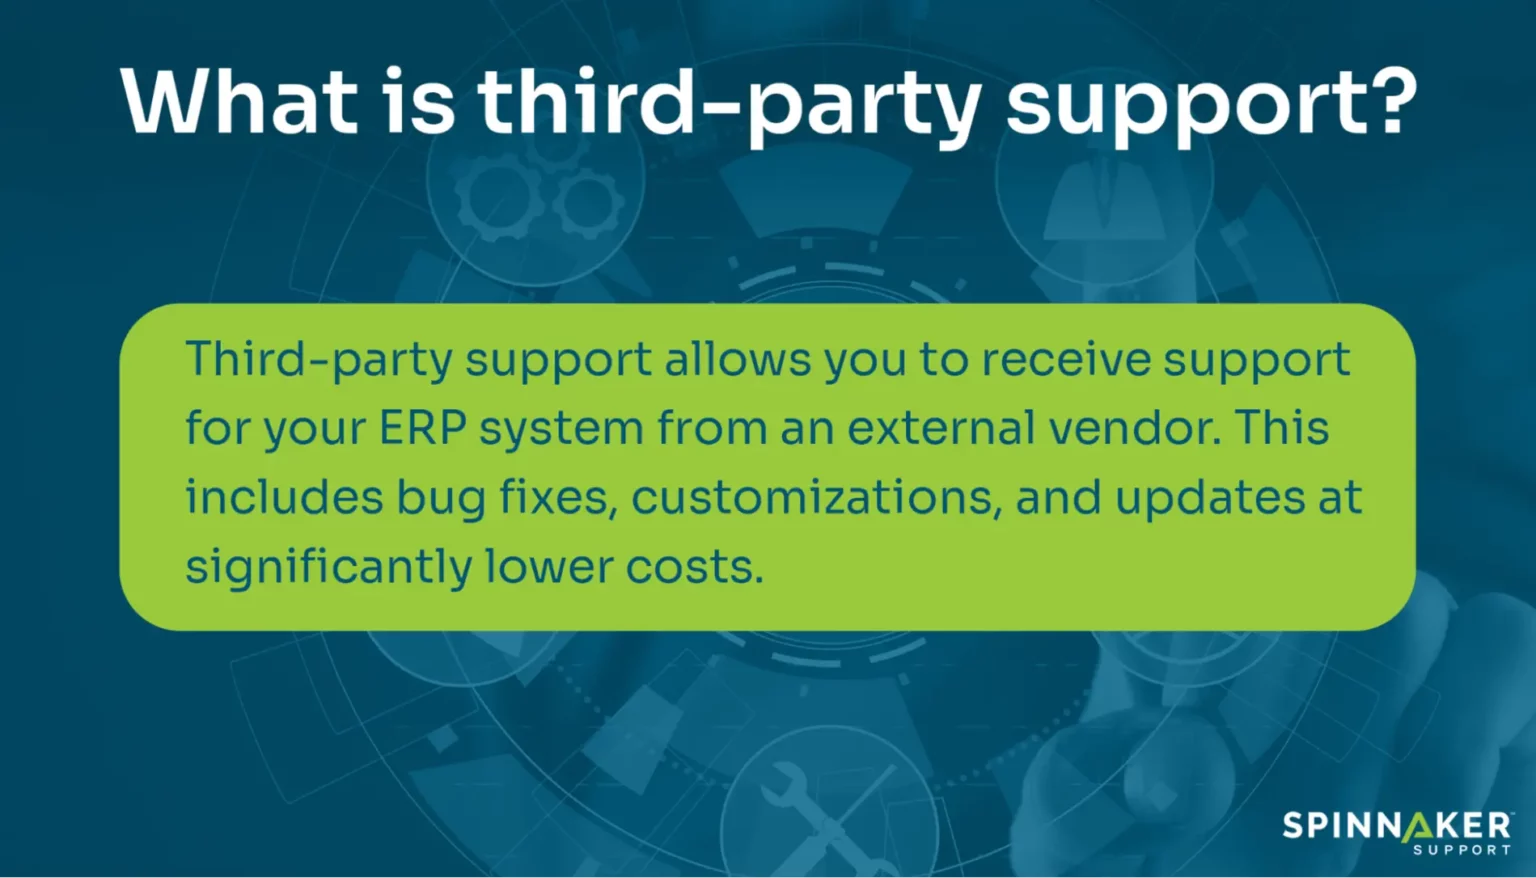 Definition of third-party support